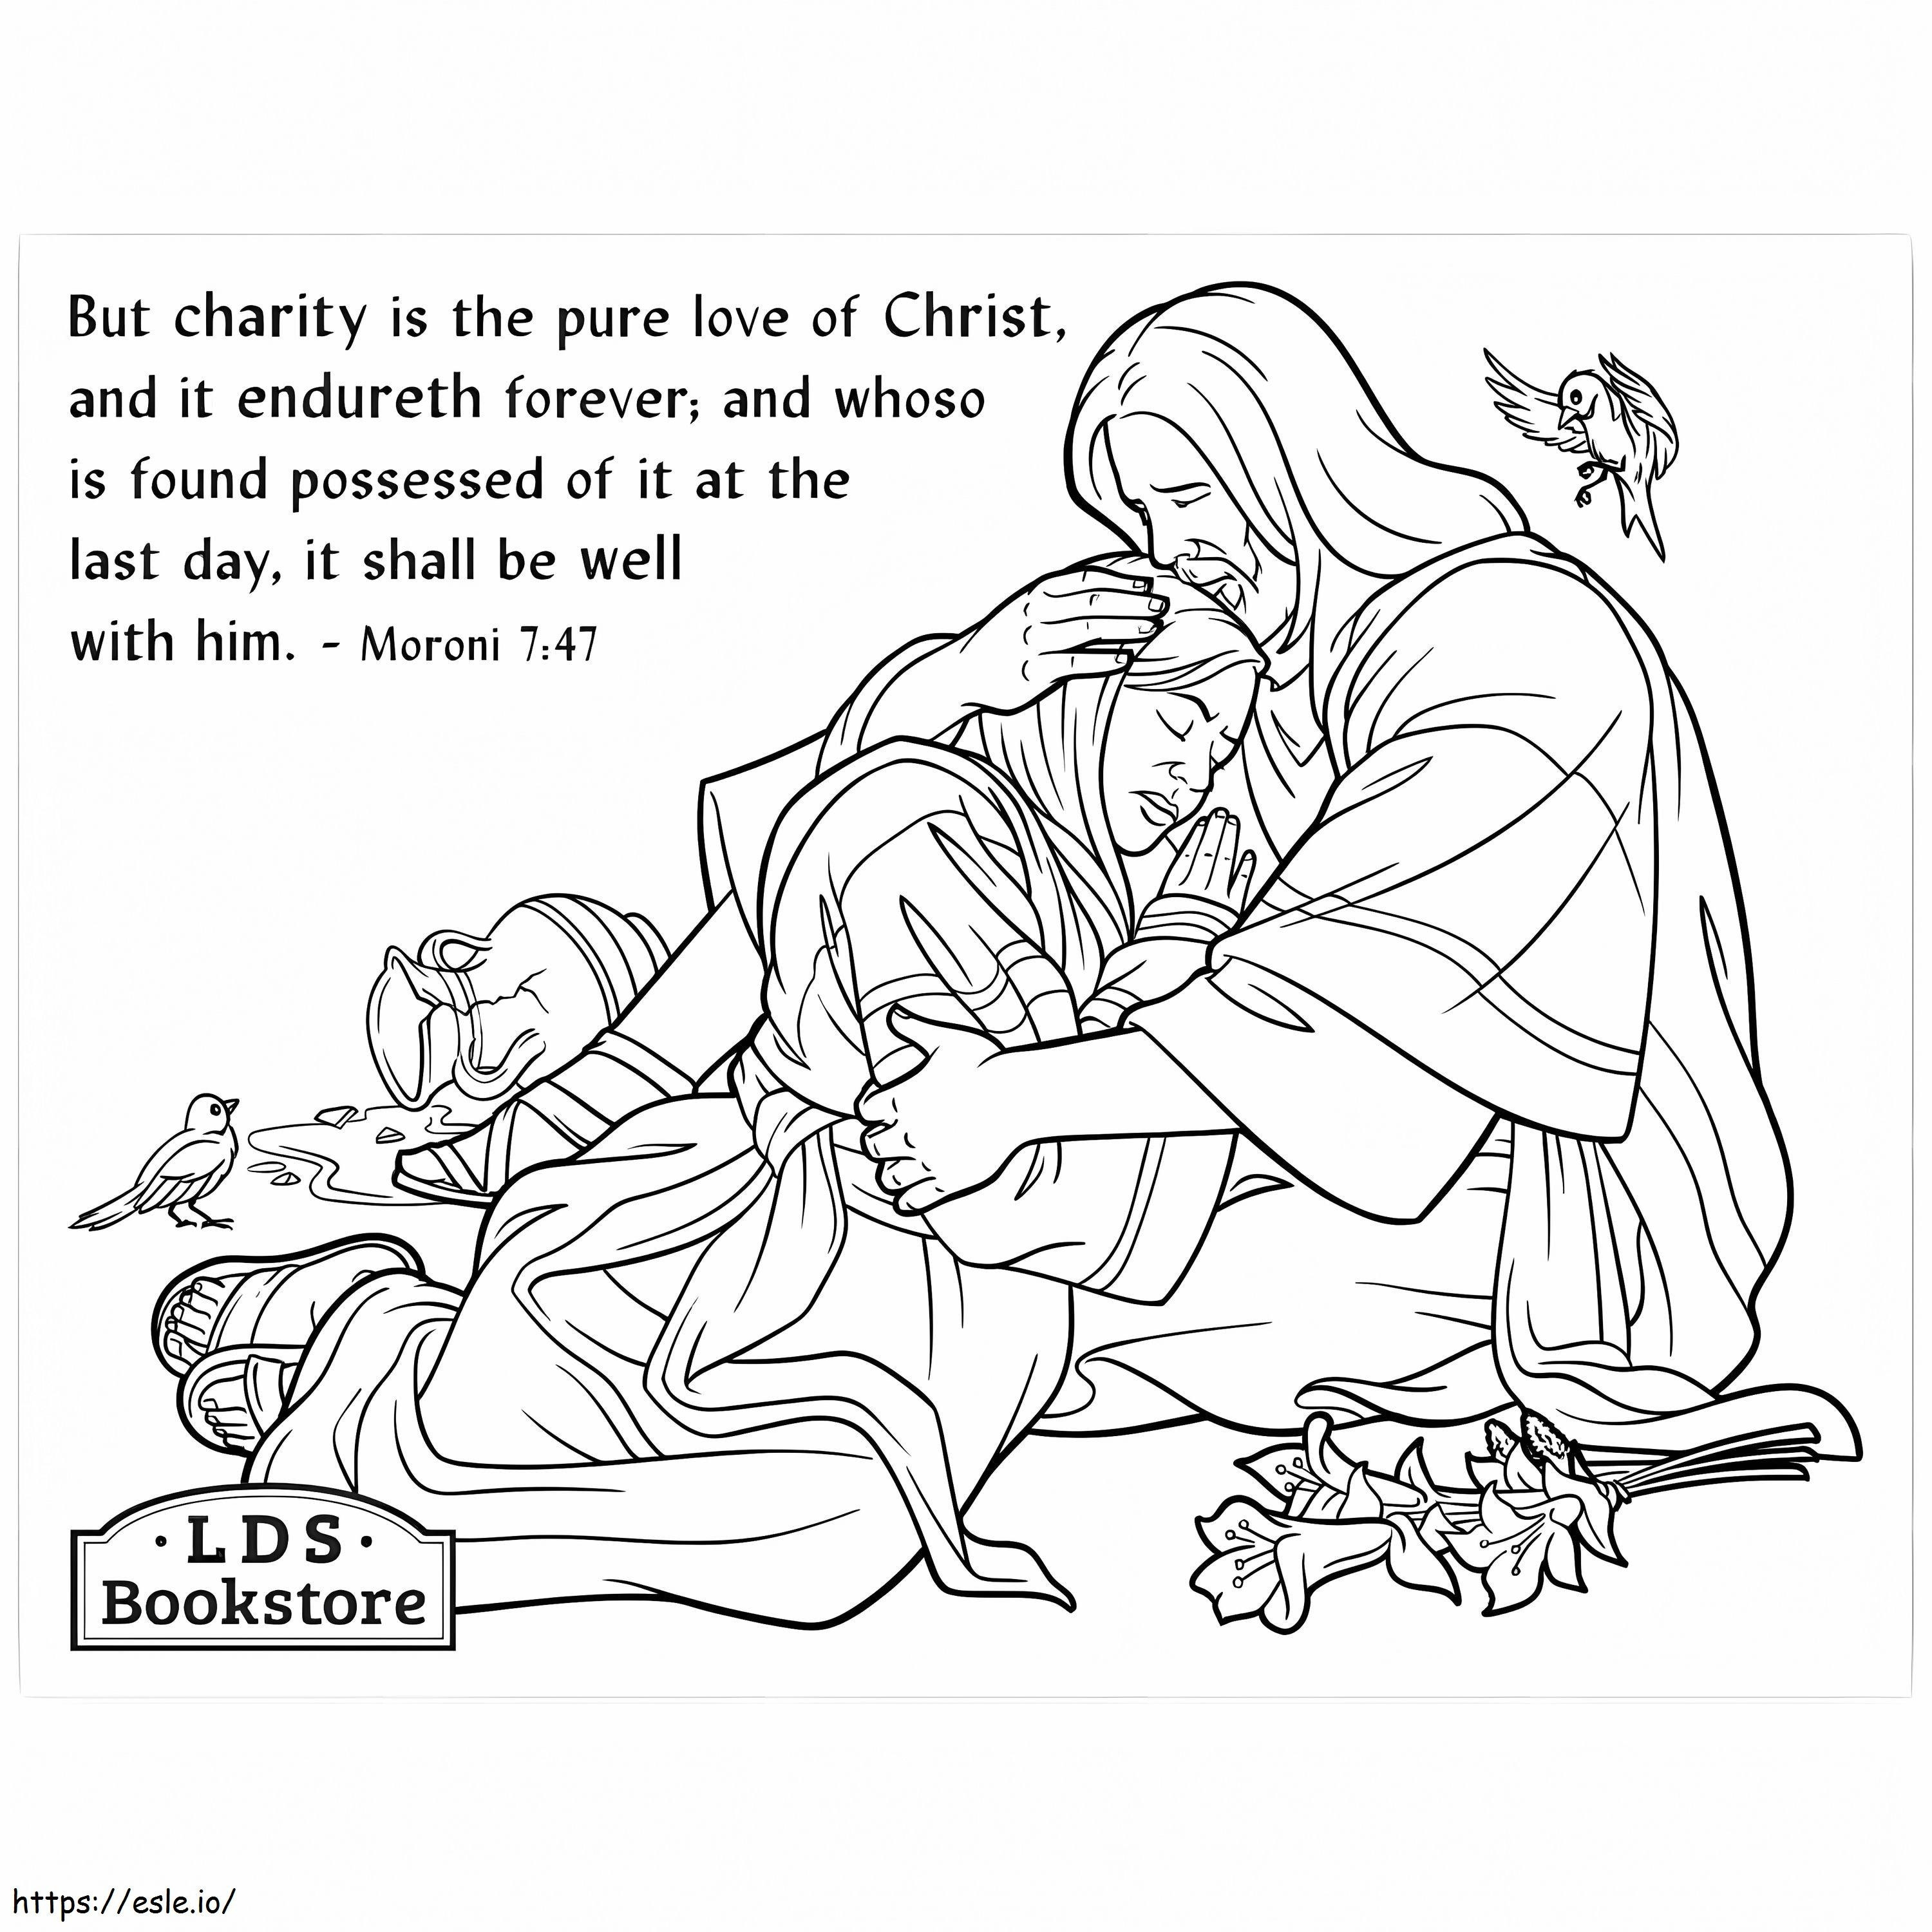 The Pure Love Of Christ coloring page